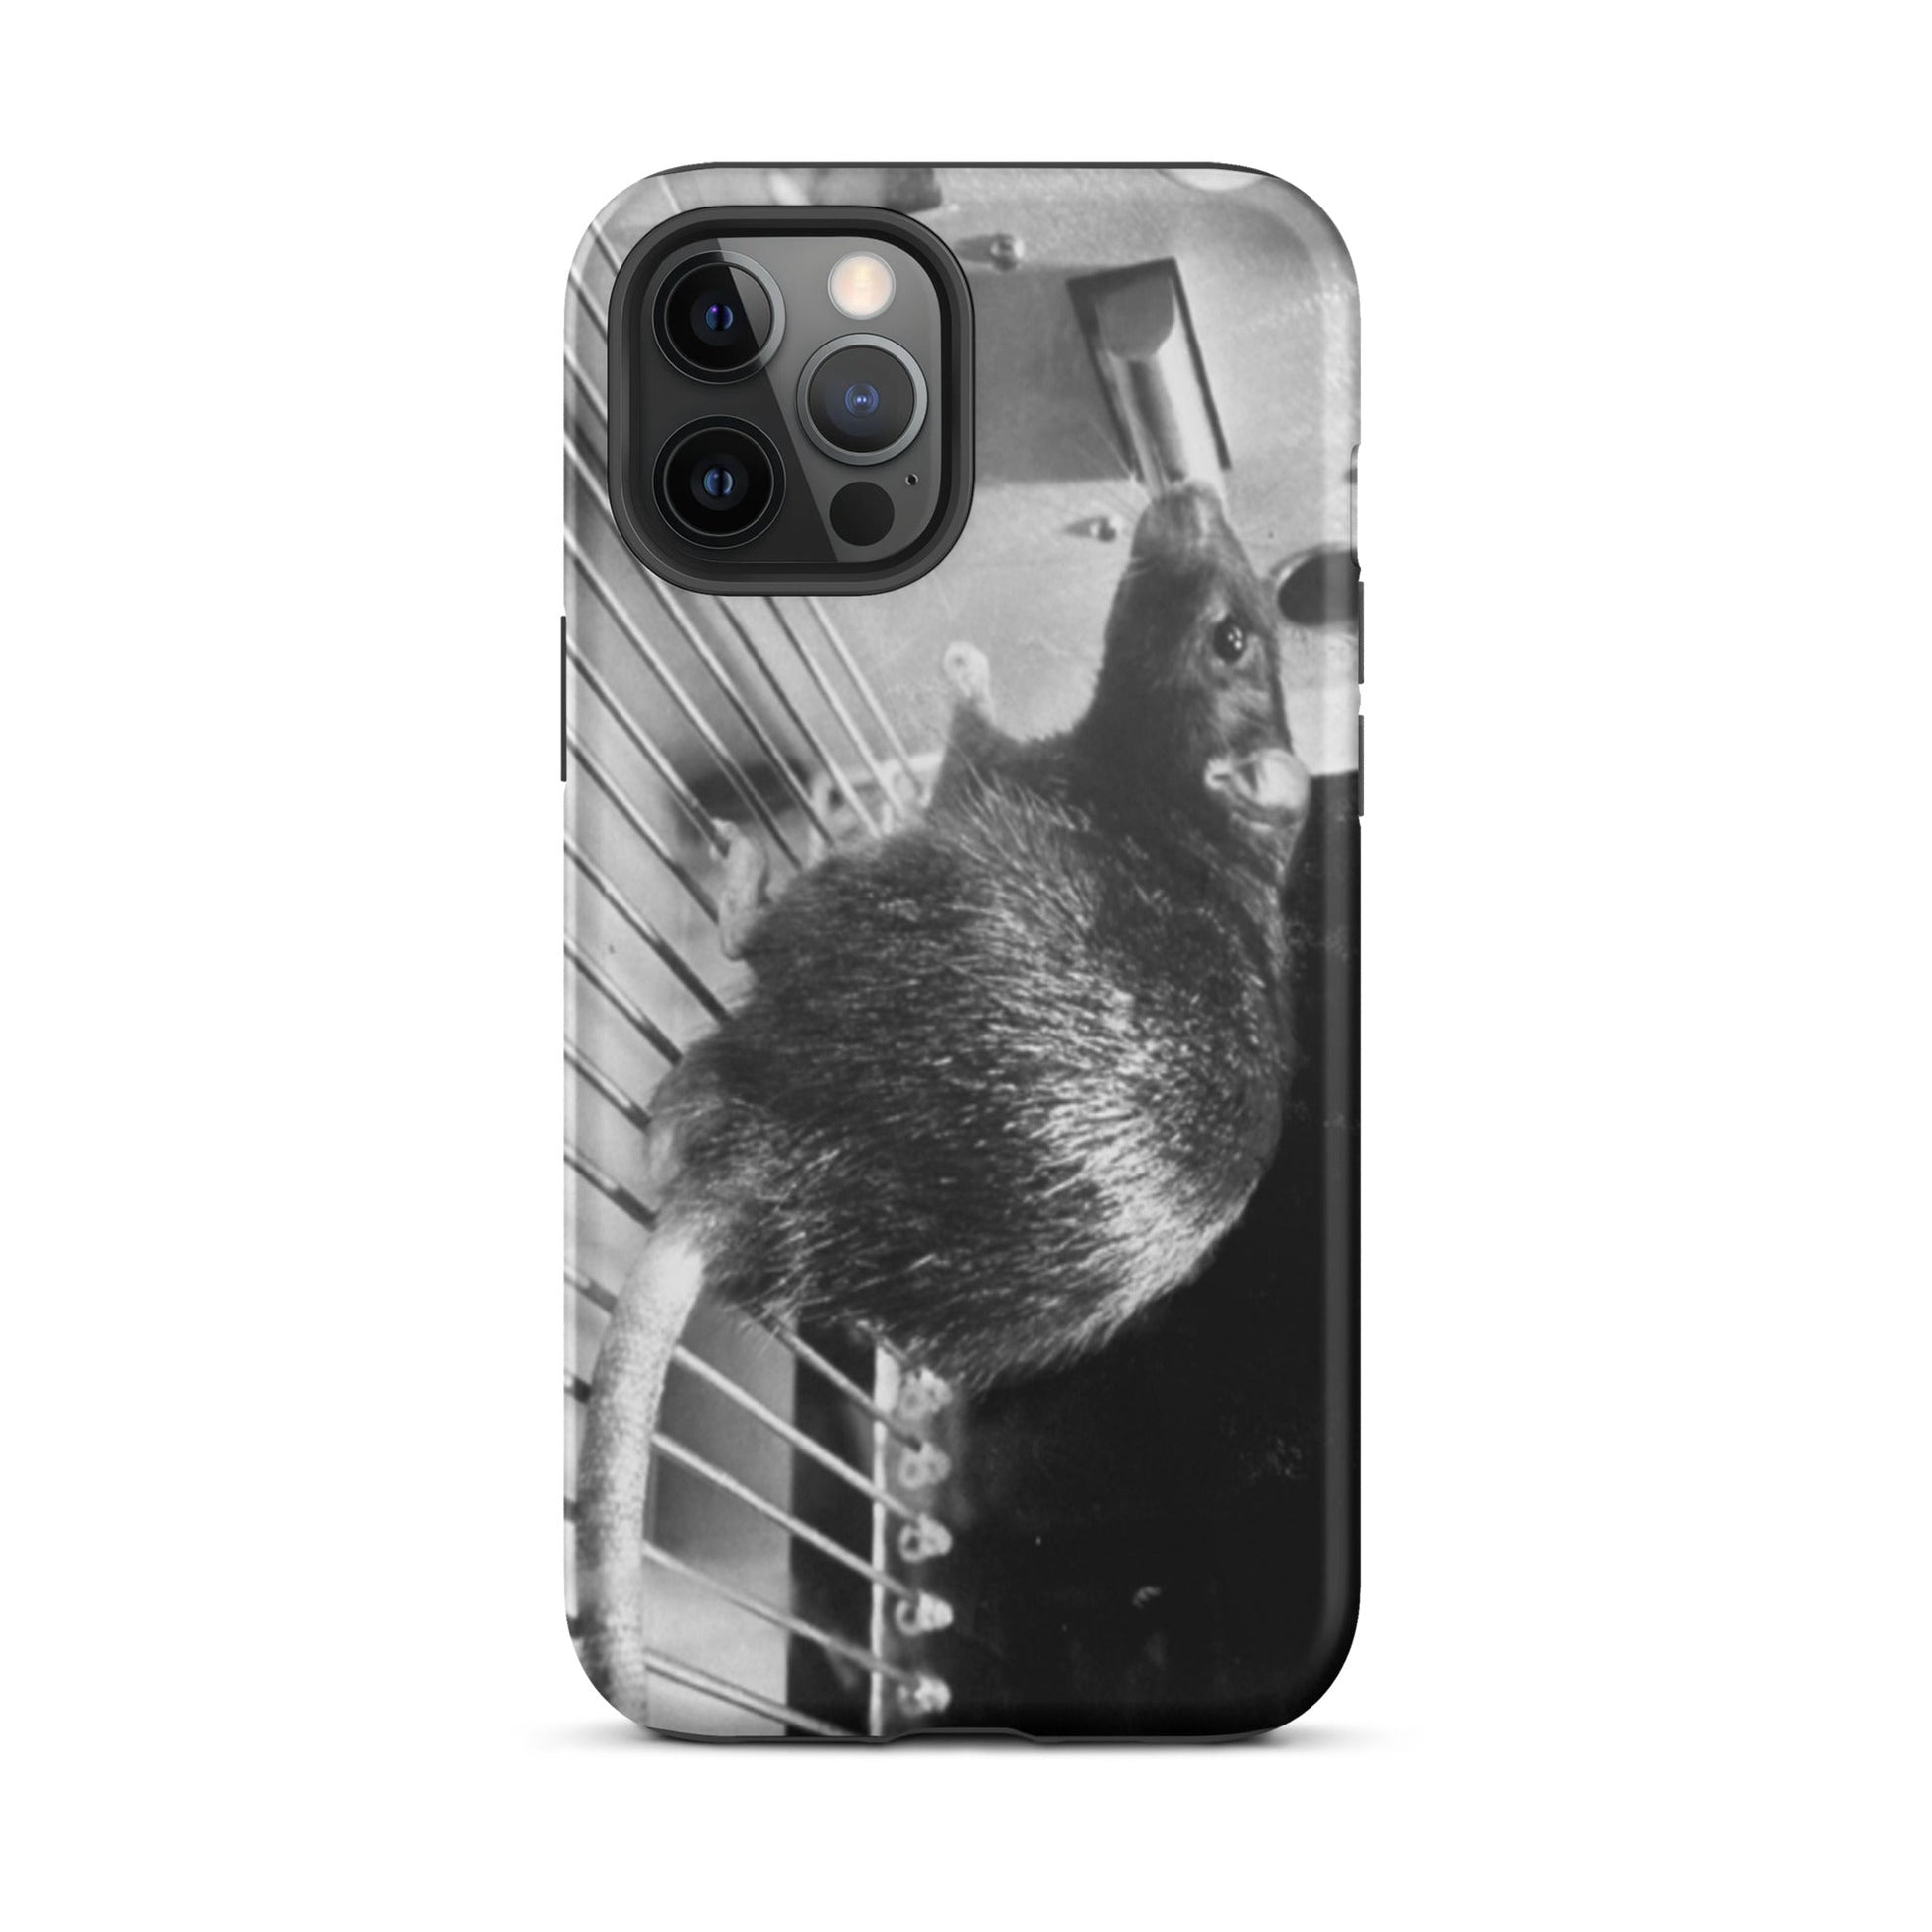 Skinner Box Rat - Tough iPhone case - Souled Out World